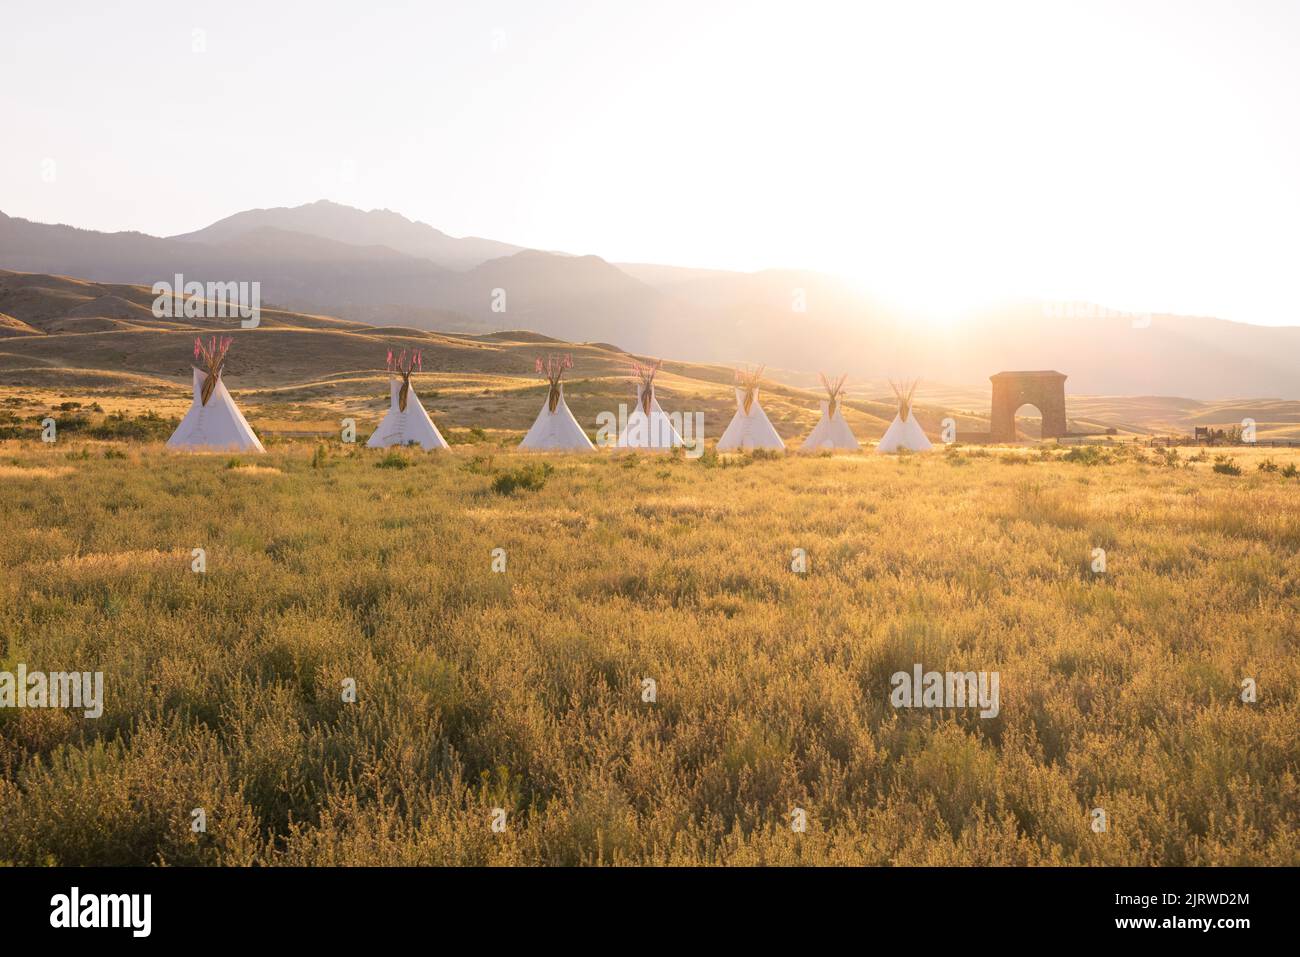 Madison Junction, United States of America. 17 August, 2022. Native American teepee lodges at the All Nations Teepee Village at the North Entrance to mark the 150th anniversary of Yellowstone National Park August 17, 2022 in Madison Junction, Montana. The project by Mountain Time Arts features 13 teepee lodges that signify a new era of Indigenous inclusion and representation in Yellowstone National Park. Credit: Jacob W. Frank/NPS/Alamy Live News Stock Photo